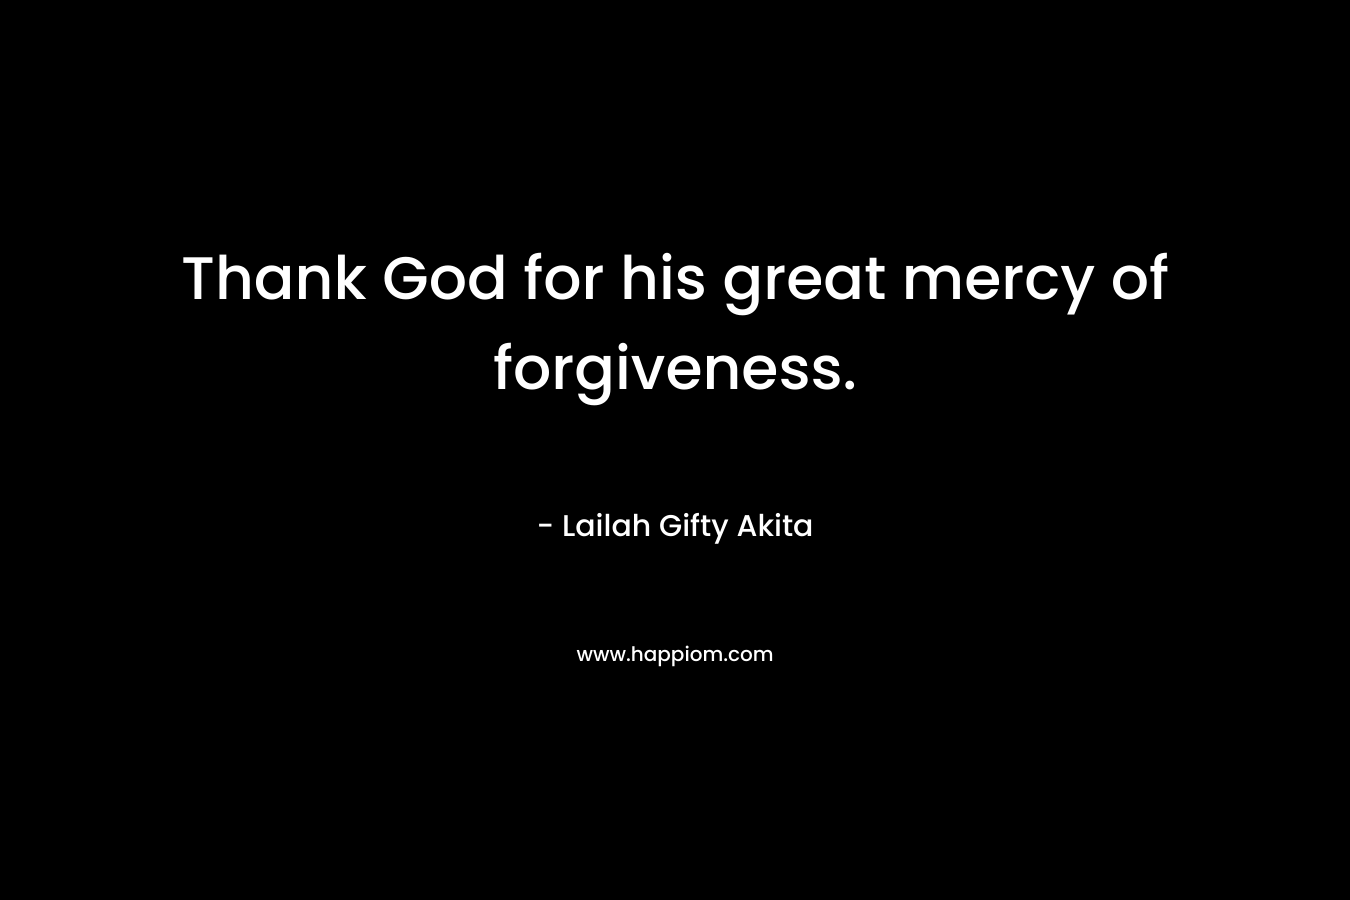 Thank God for his great mercy of forgiveness.